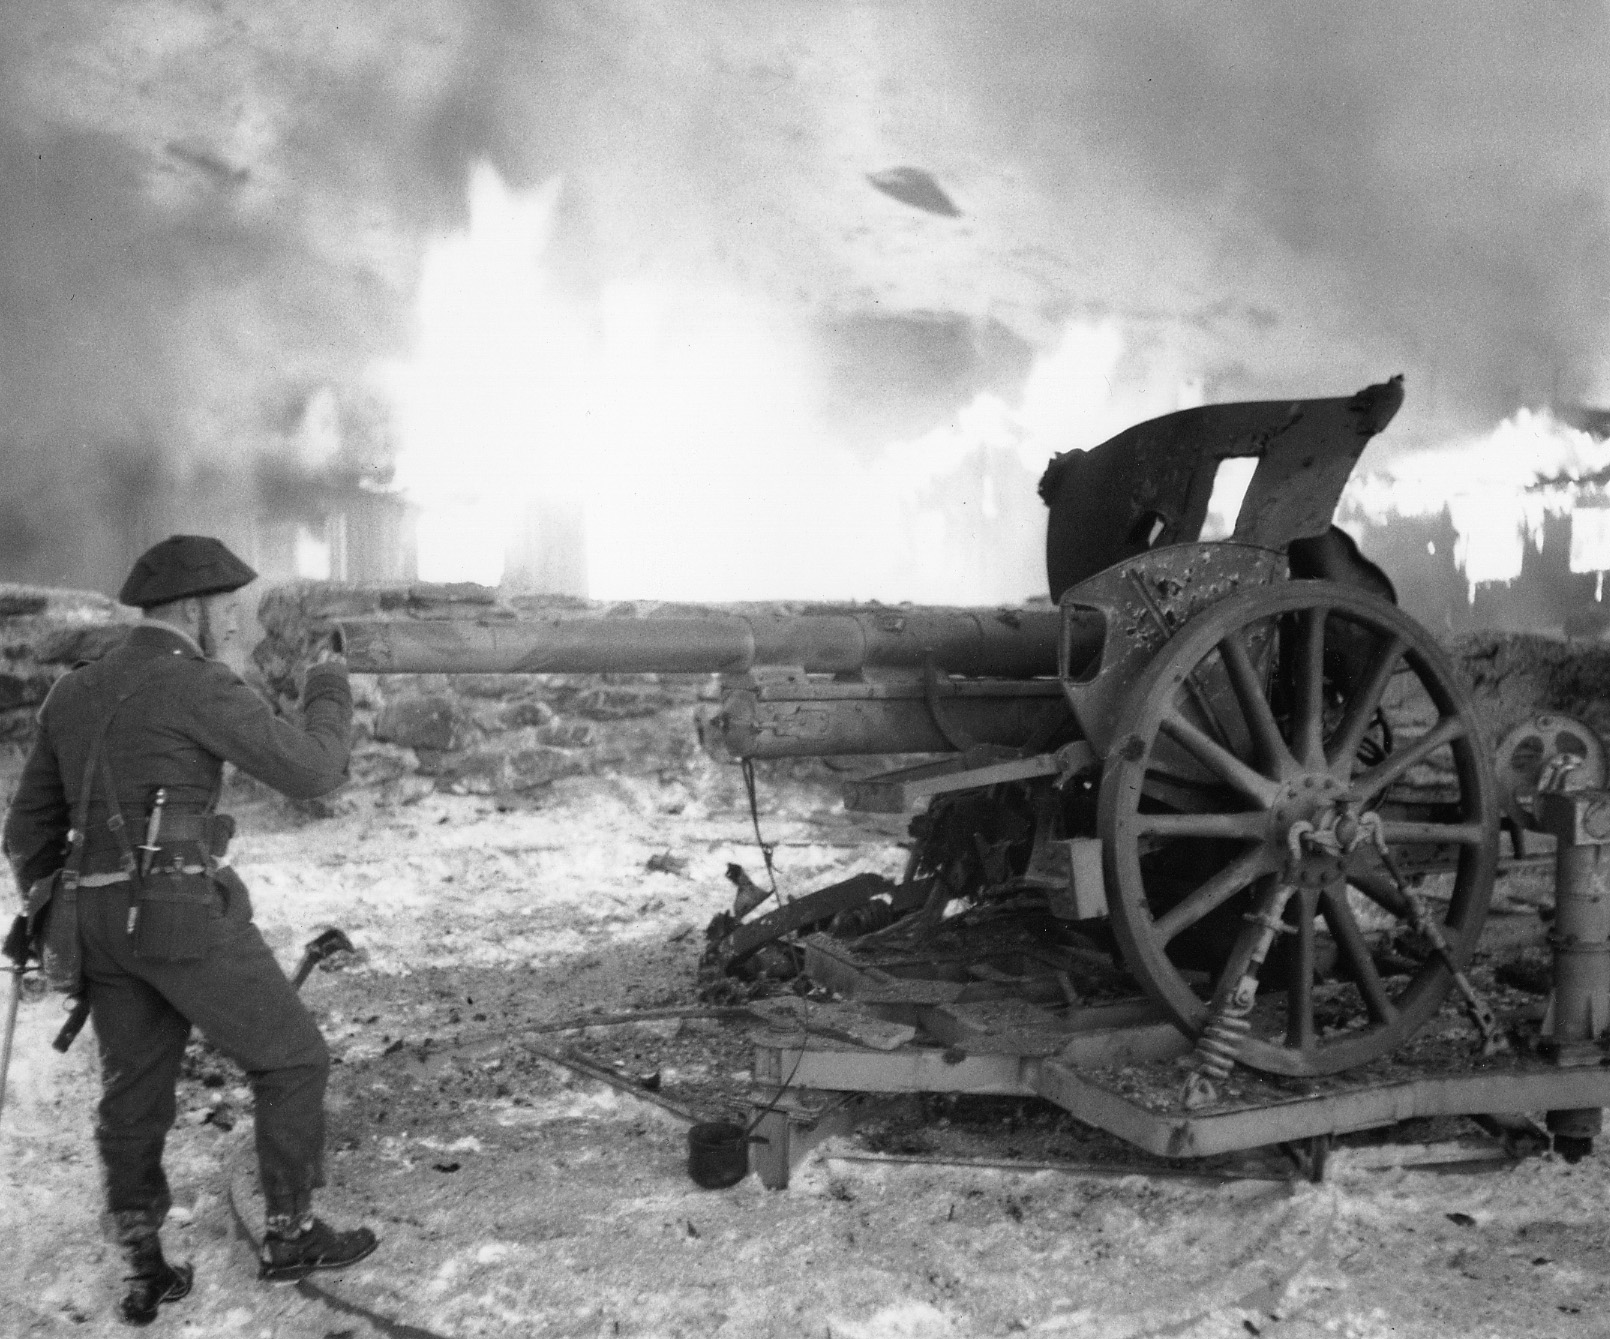 Churchill inspects the wreckage of a German field gun following action against elements of the Wehrmacht in France.